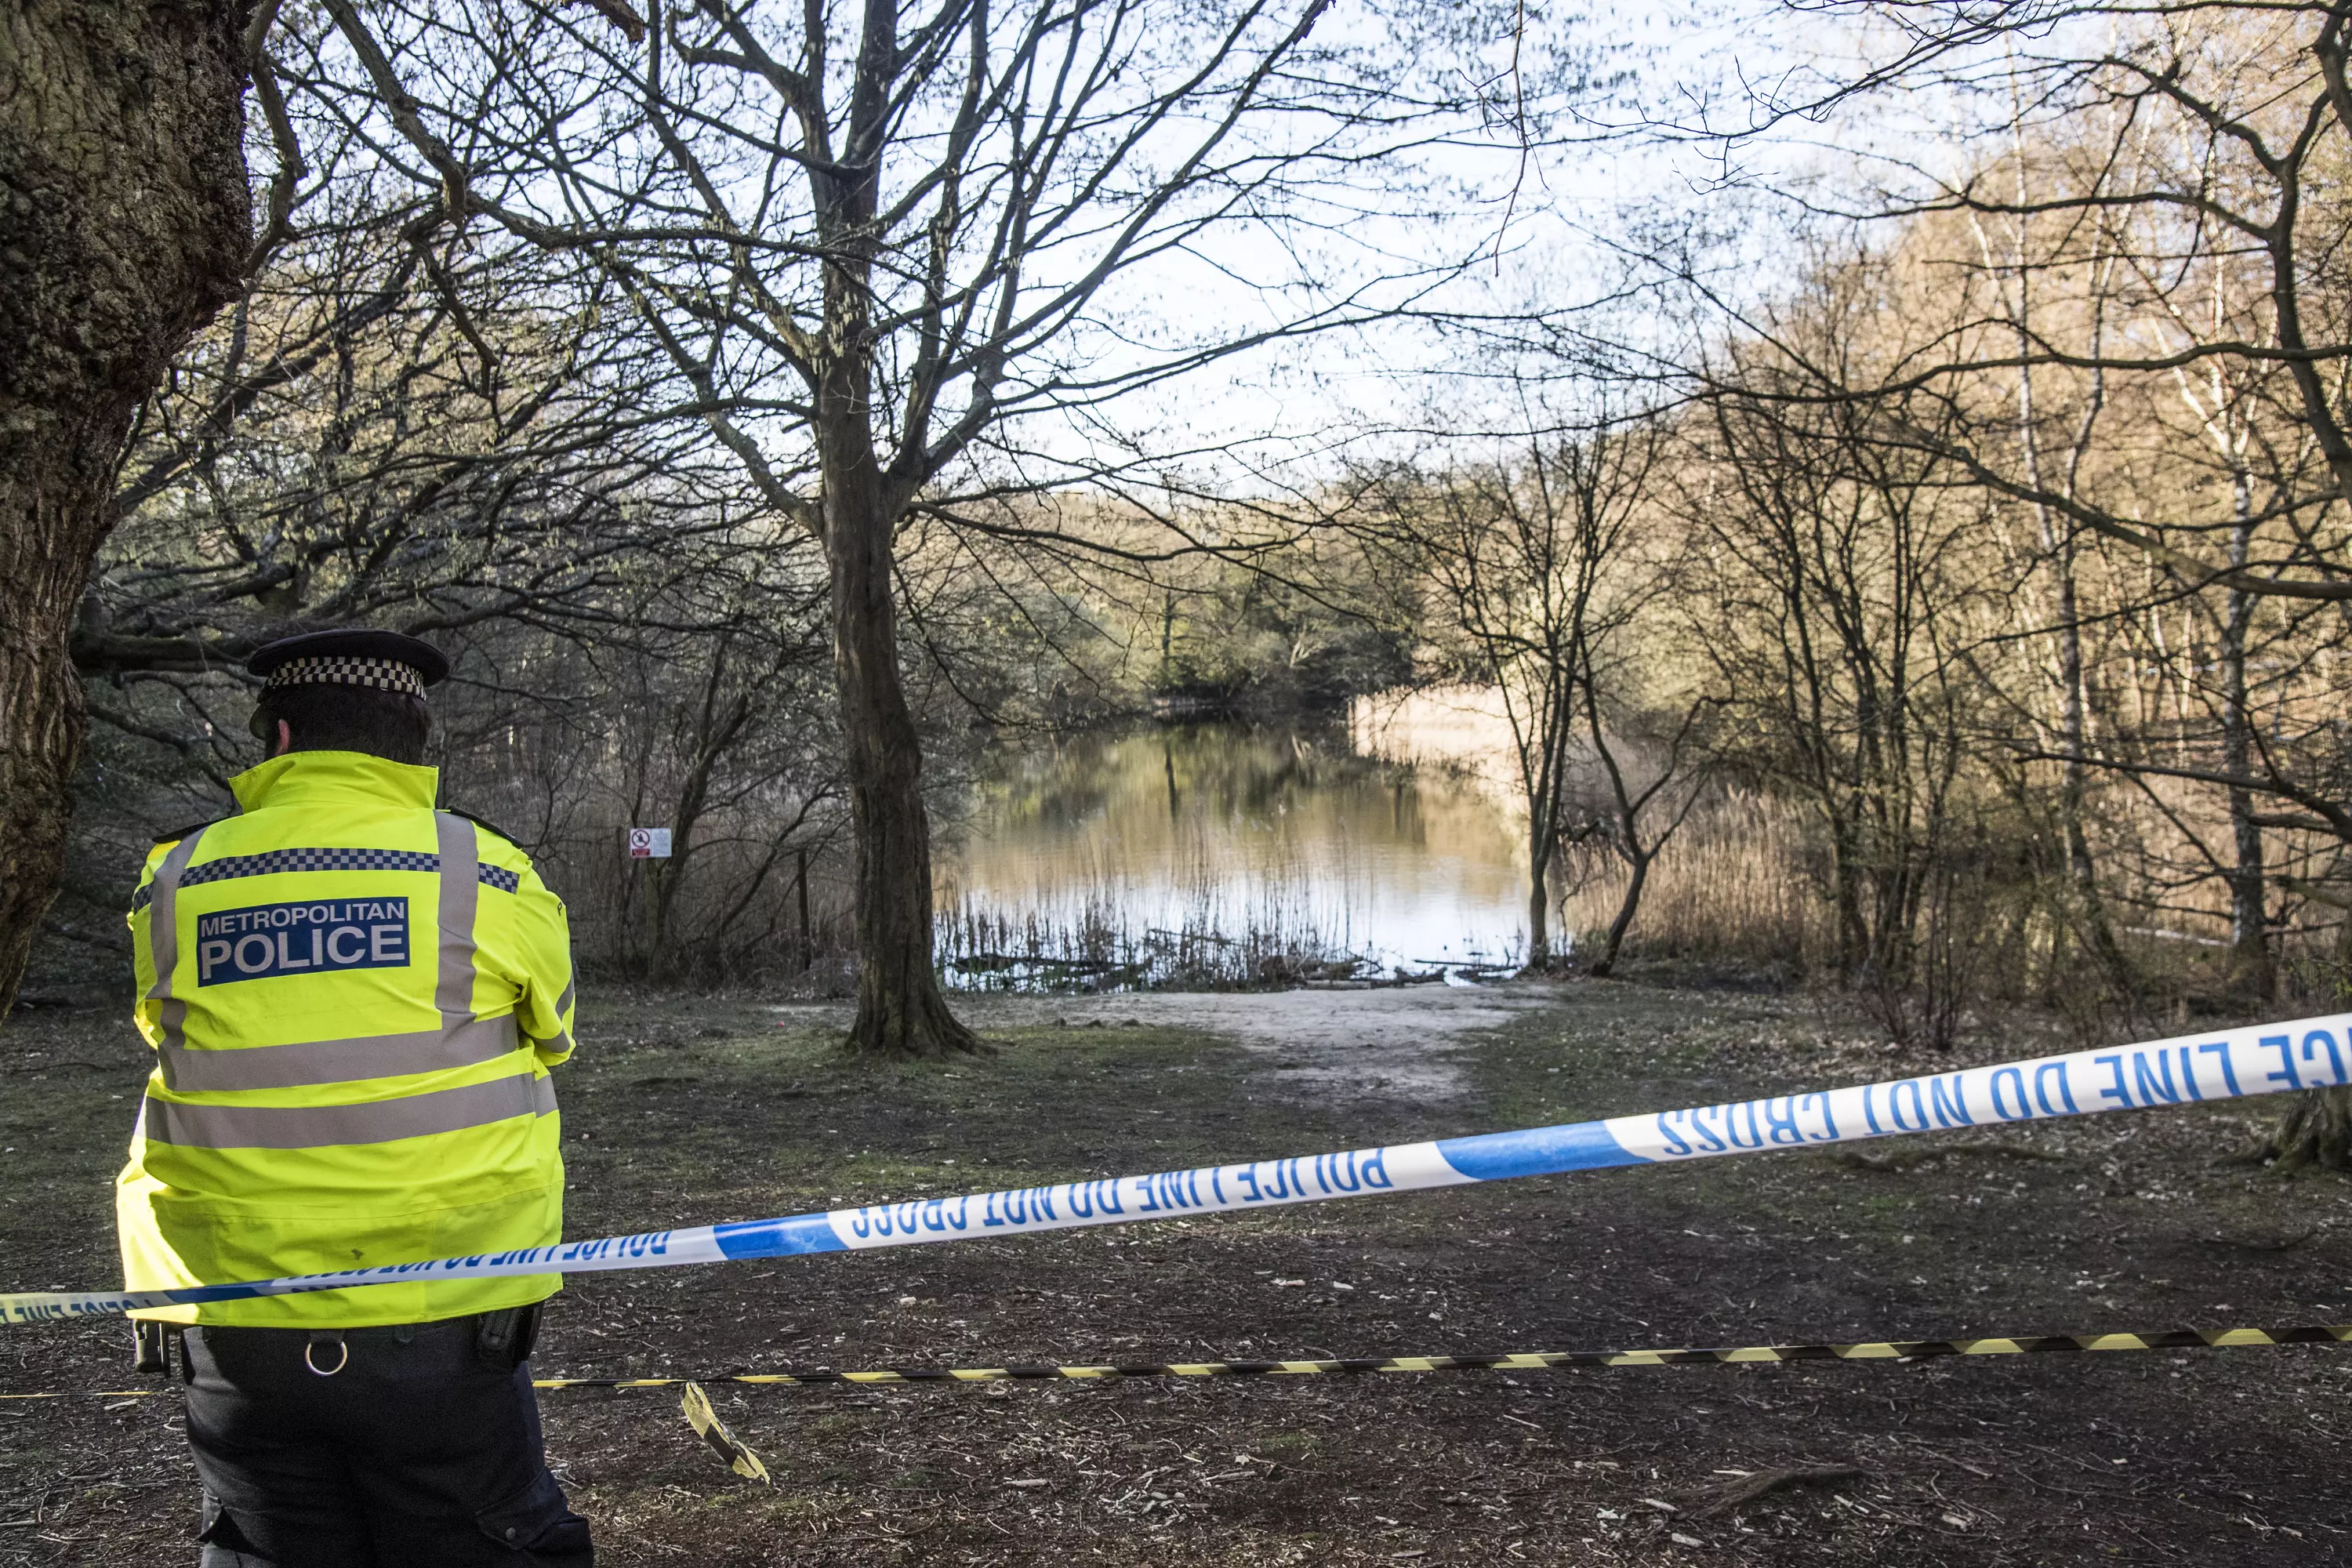 Police found Okorogheye's body in Epping Forest on Monday evening.